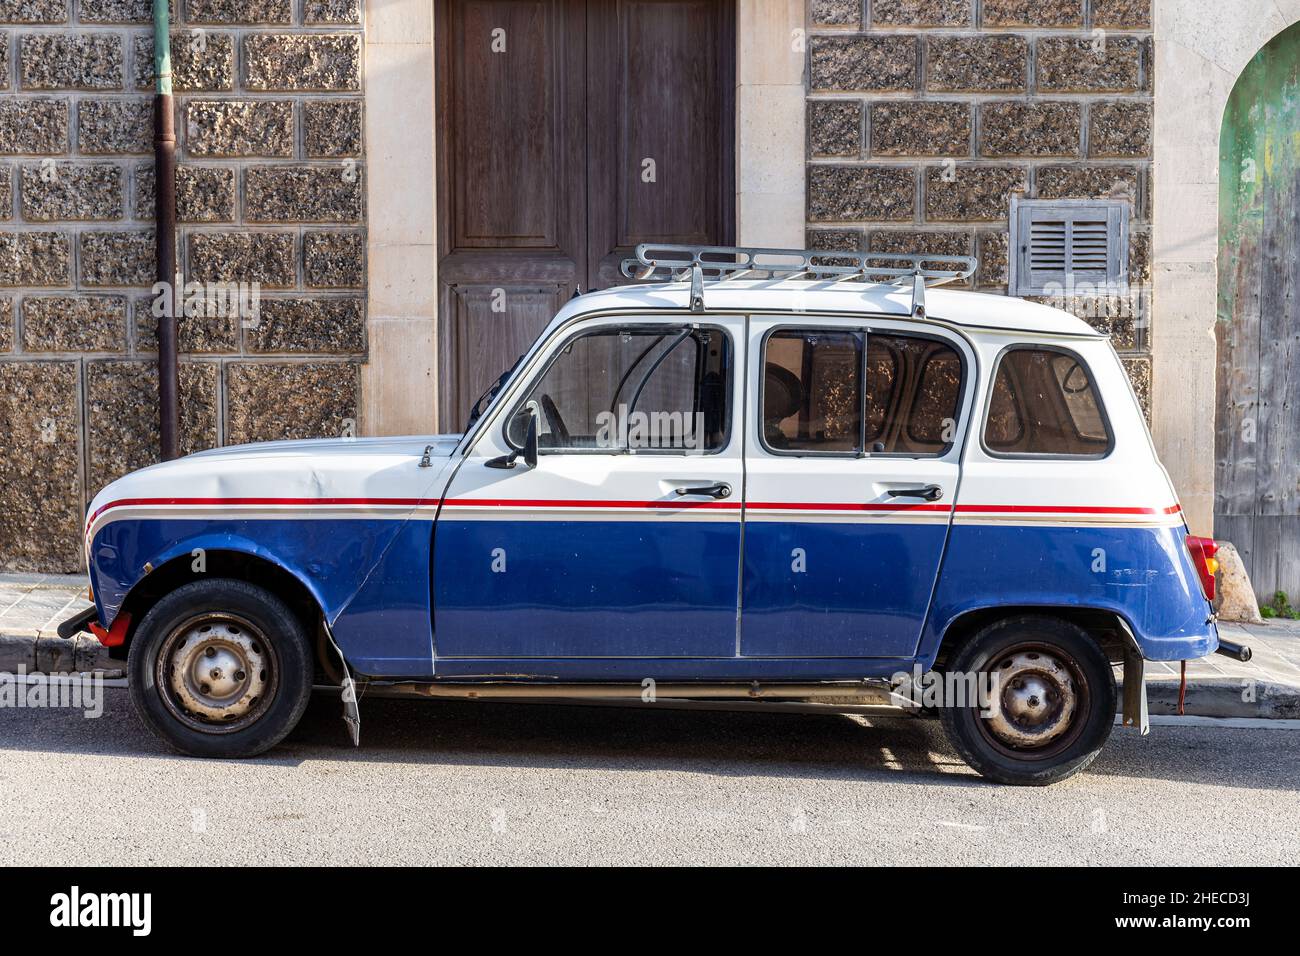 Renault 4, also R4 or 4L or Quatrelle, with a roof rack, in a town in Majorca, Mallorca, Balearic Islands, Spain Stock Photo